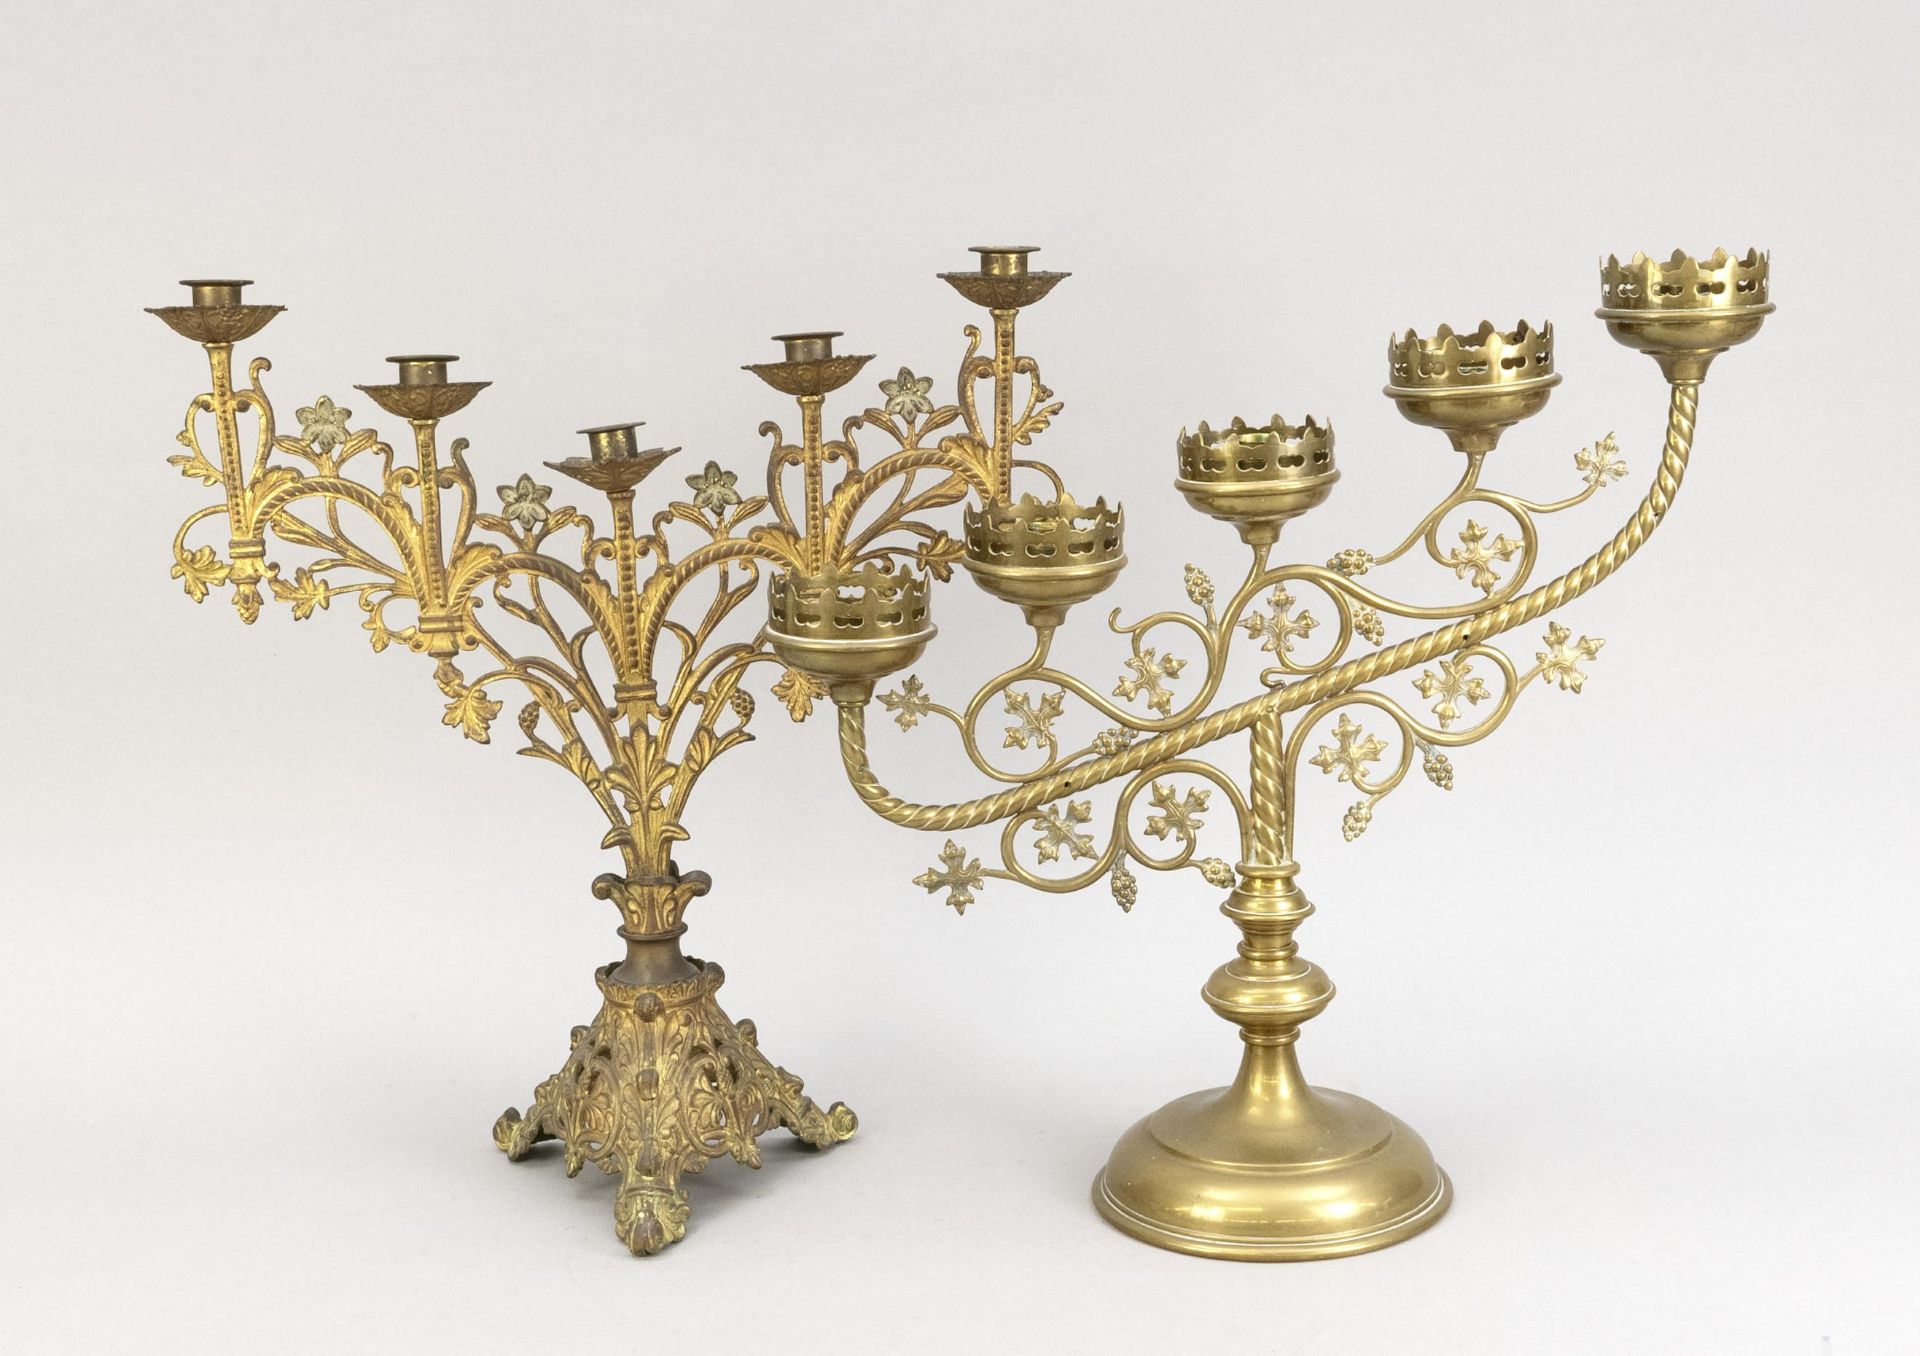 2 altar candlesticks, end of 19th c., bronze/brass (1 x with residual gilding). Both in different